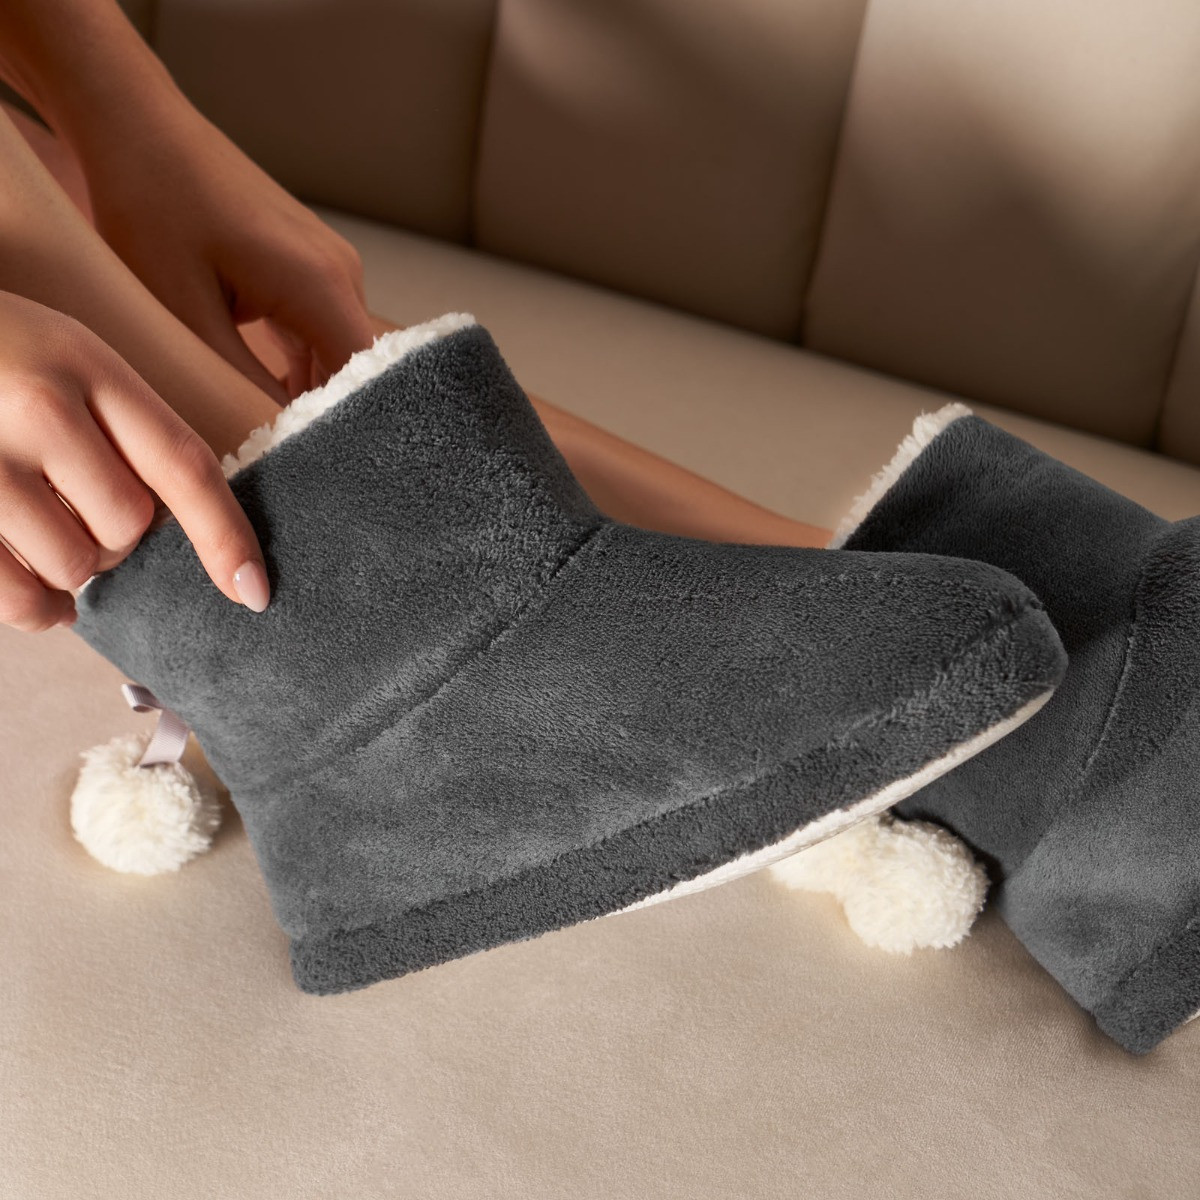 OHS Fluffy Boot Slippers - Grey>